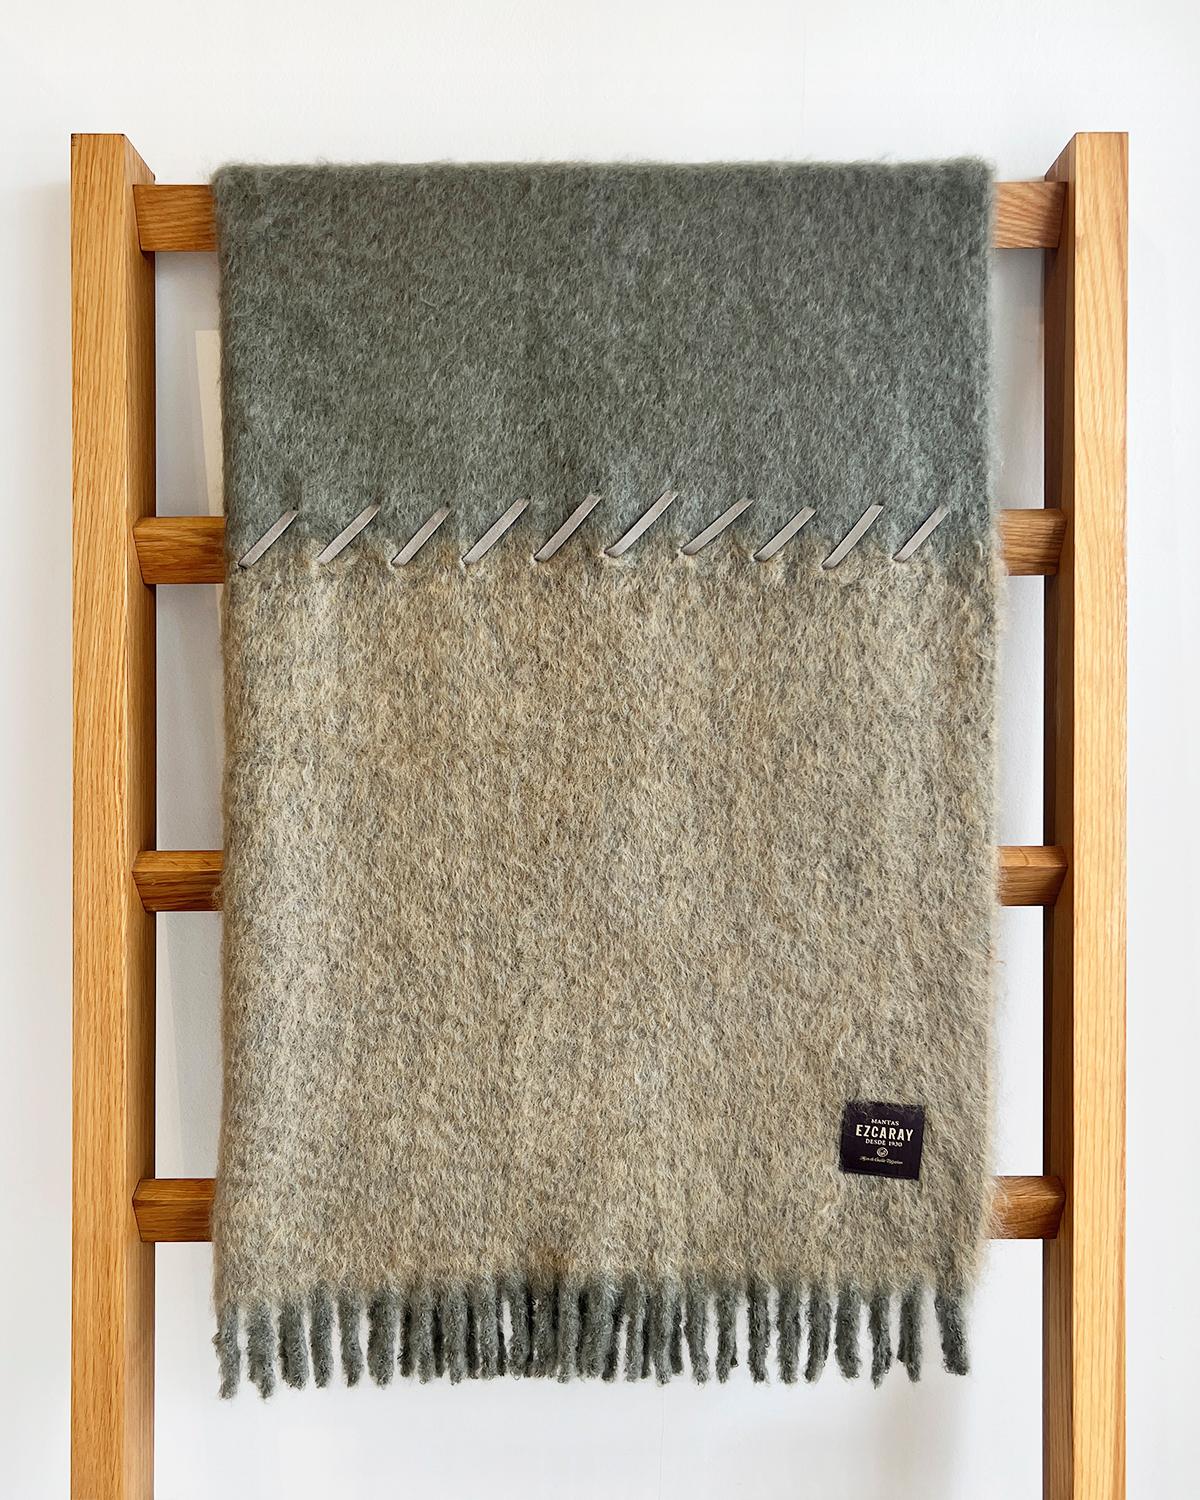 Rustic Mantas Ezcaray Sage and Moss Green Mohair Blanket Throw w/ Suede Whipstitch For Sale